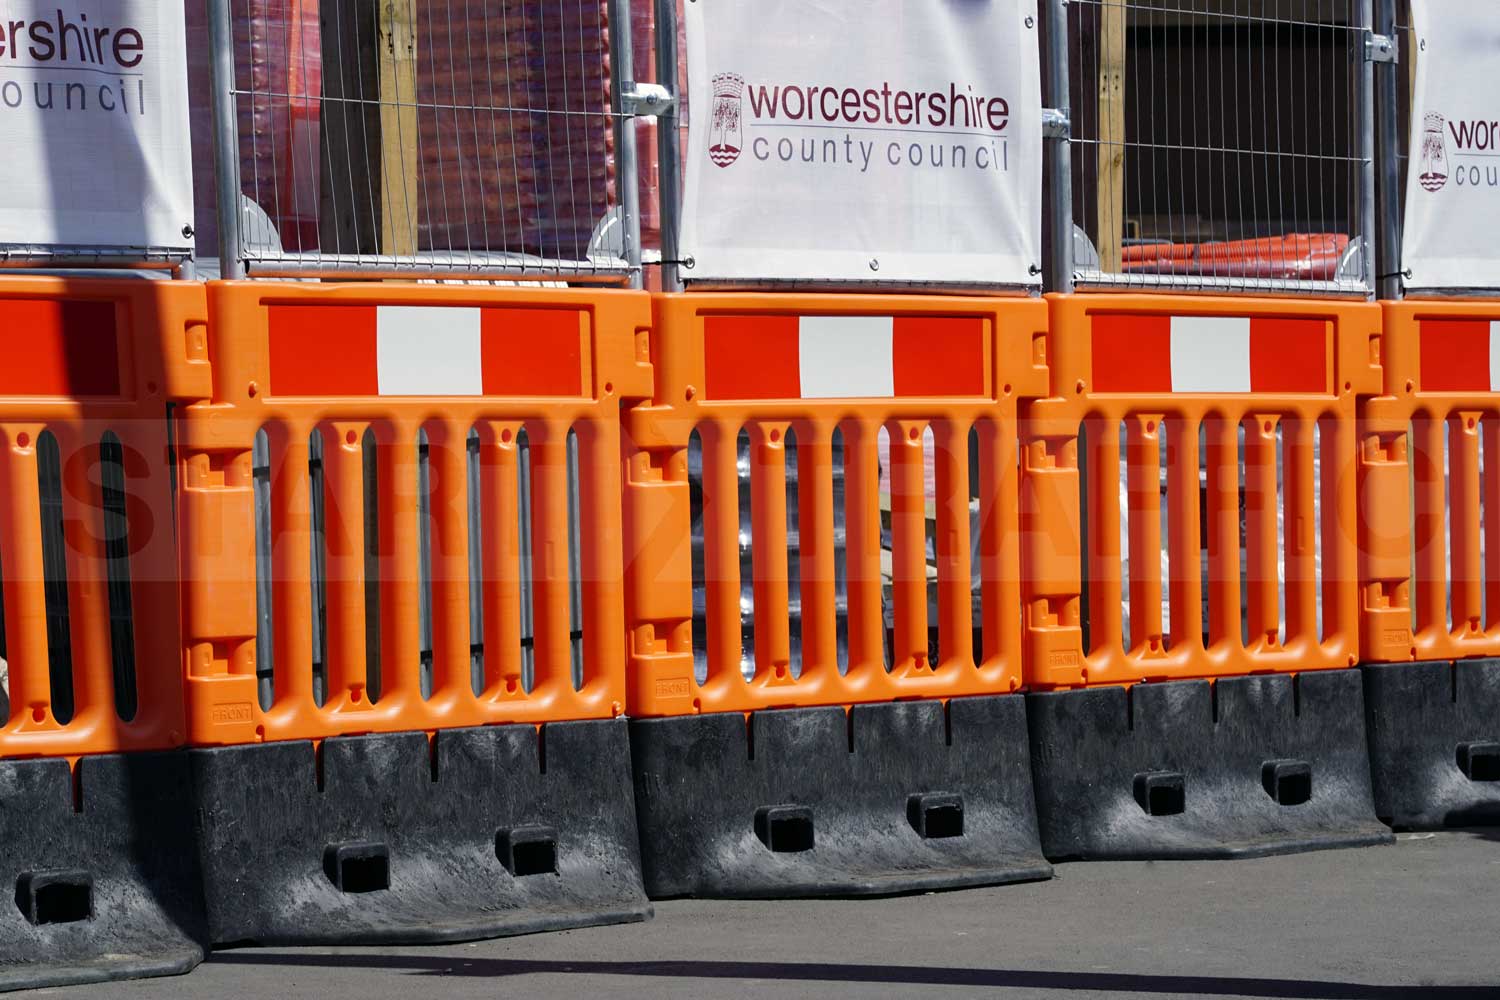 StrongWall Barriers with Fence tops protecting pedestrians from the worksite